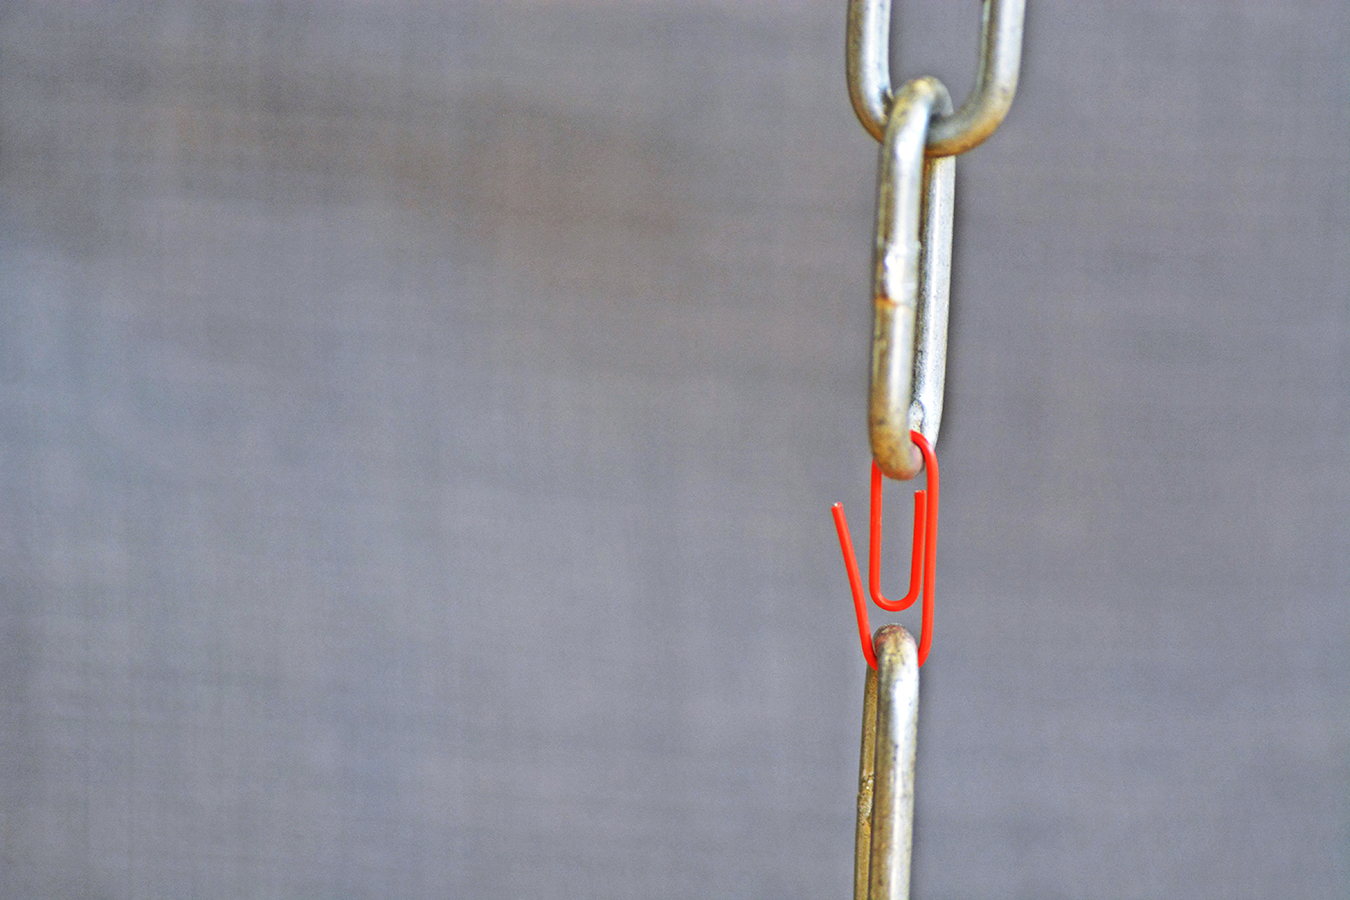 A red paperclip holds two steel chain ends together - Weakest point in chain represented by a paperclip in a normal chain - Concept for teamwork abstract illustrated